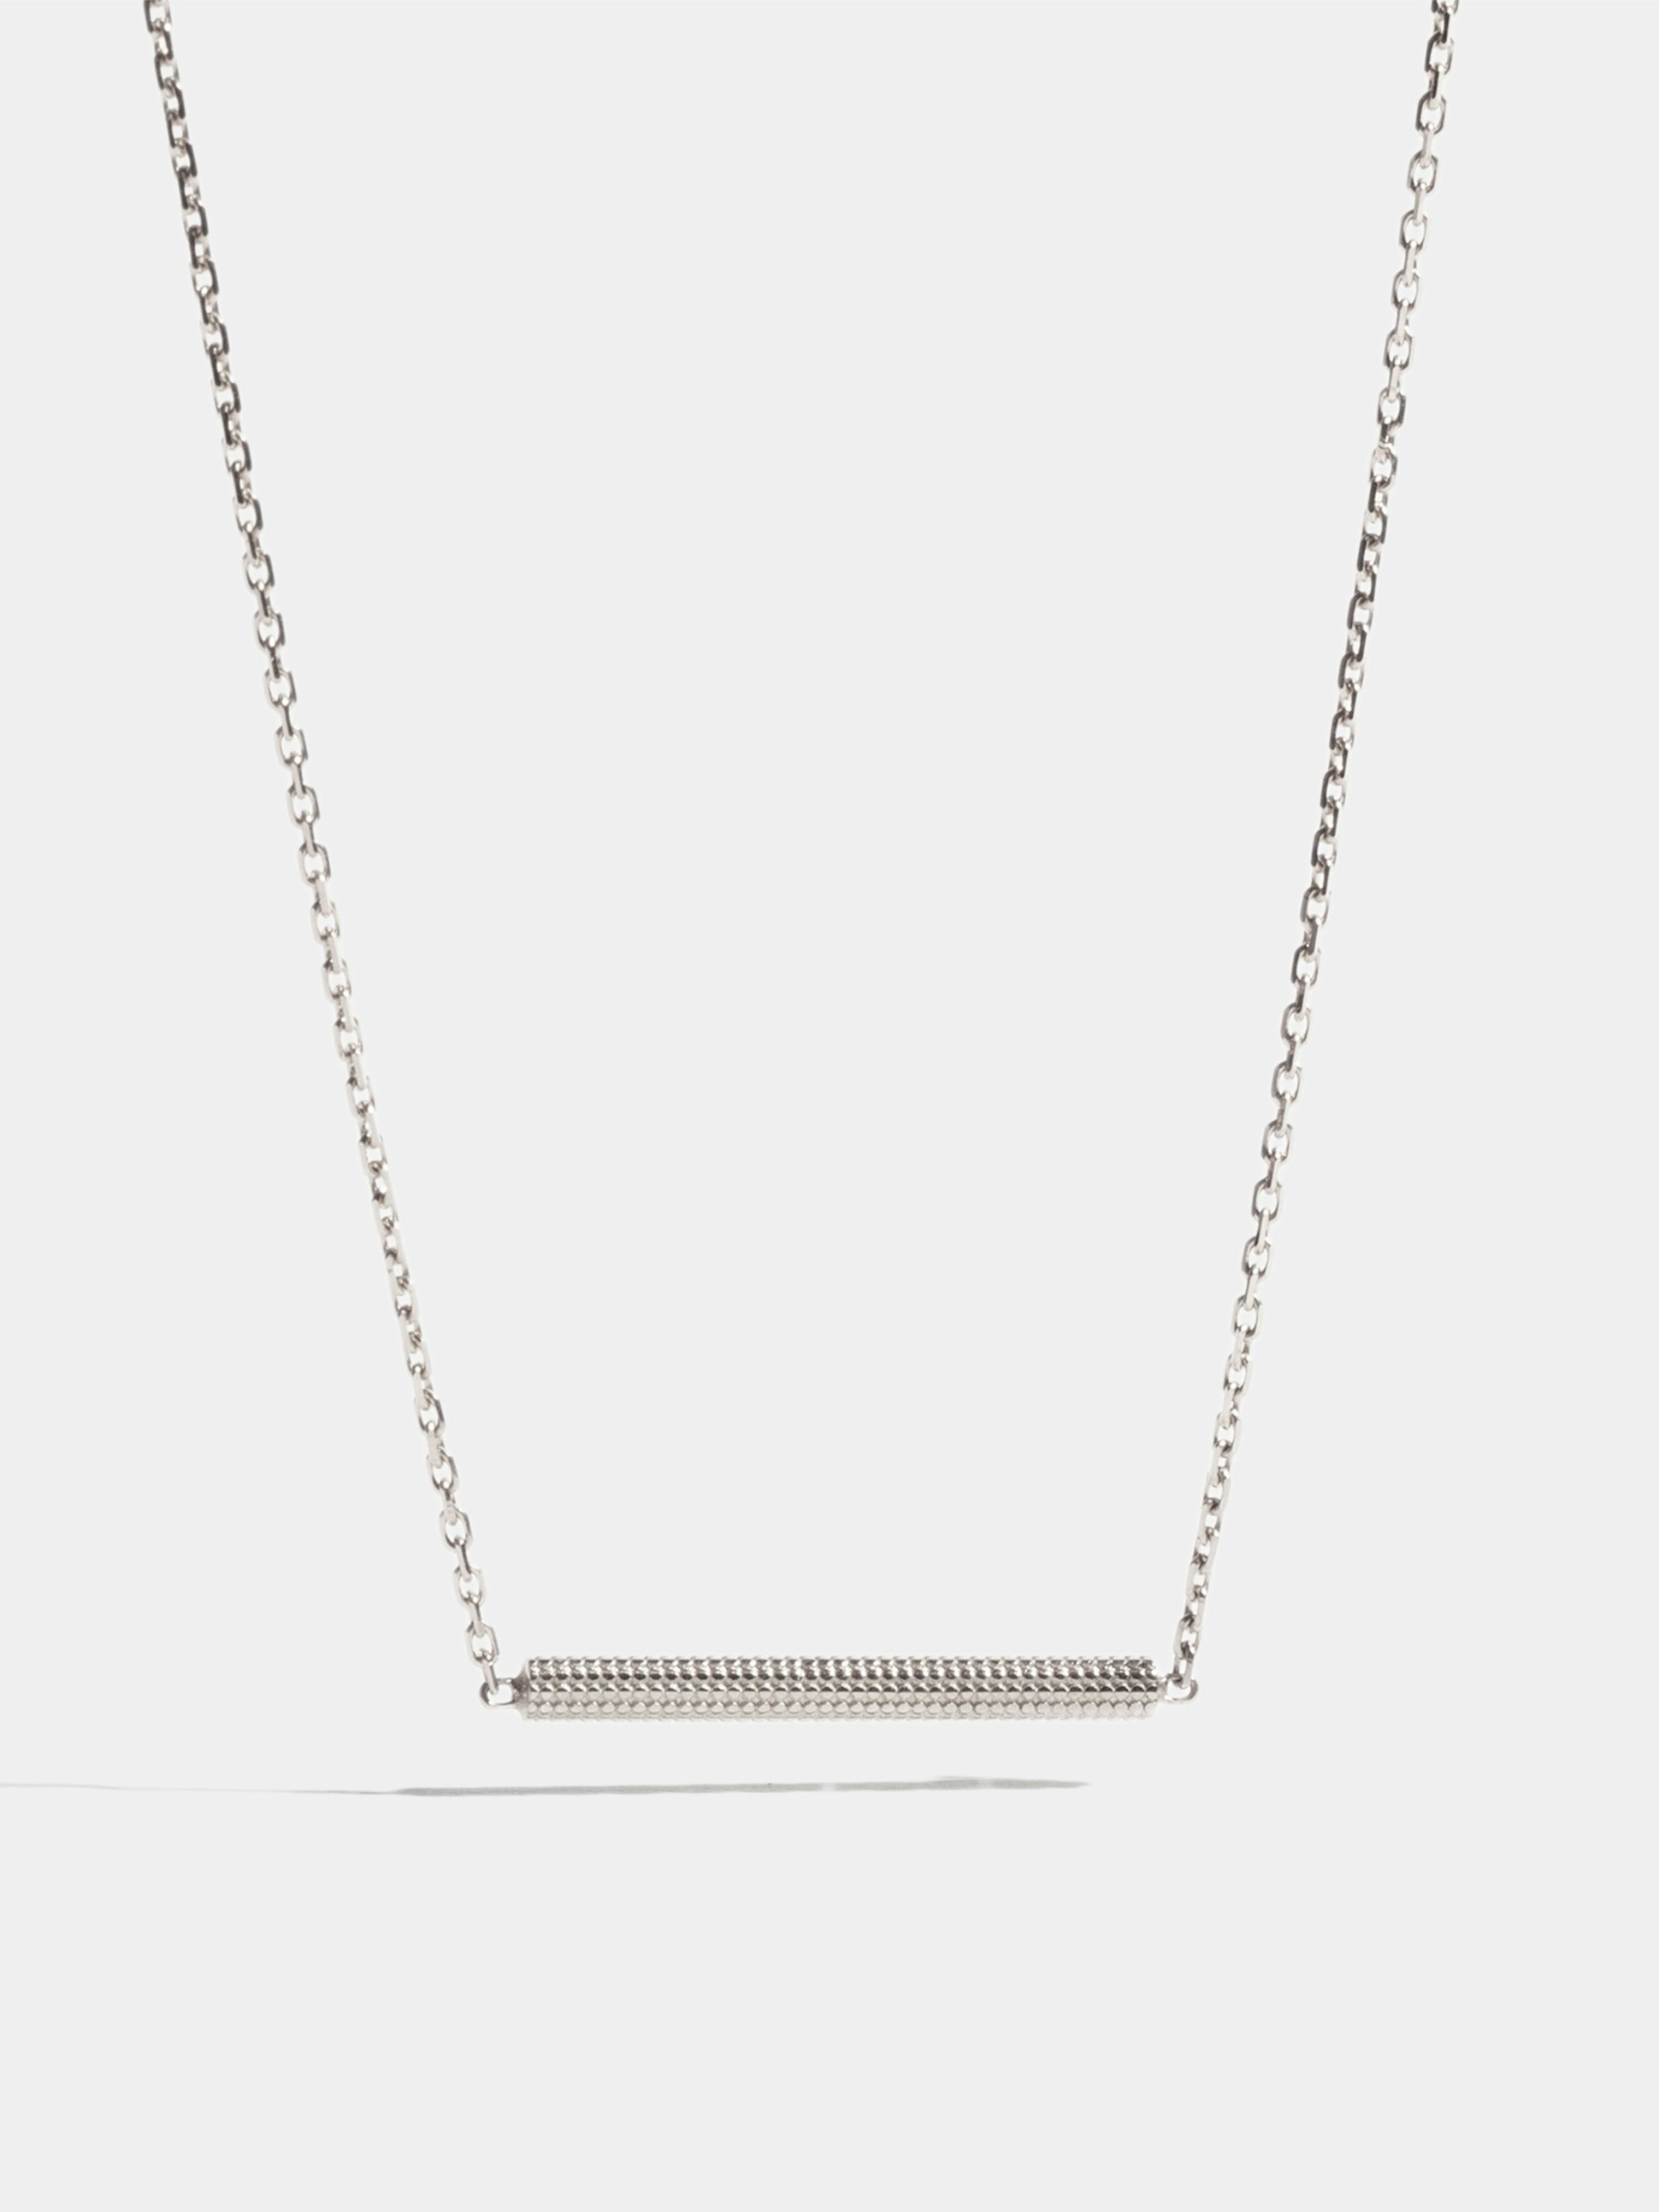 Anagramme "millegrains" motif in white gold 18k Fairmined ethical, on 42 cm chain